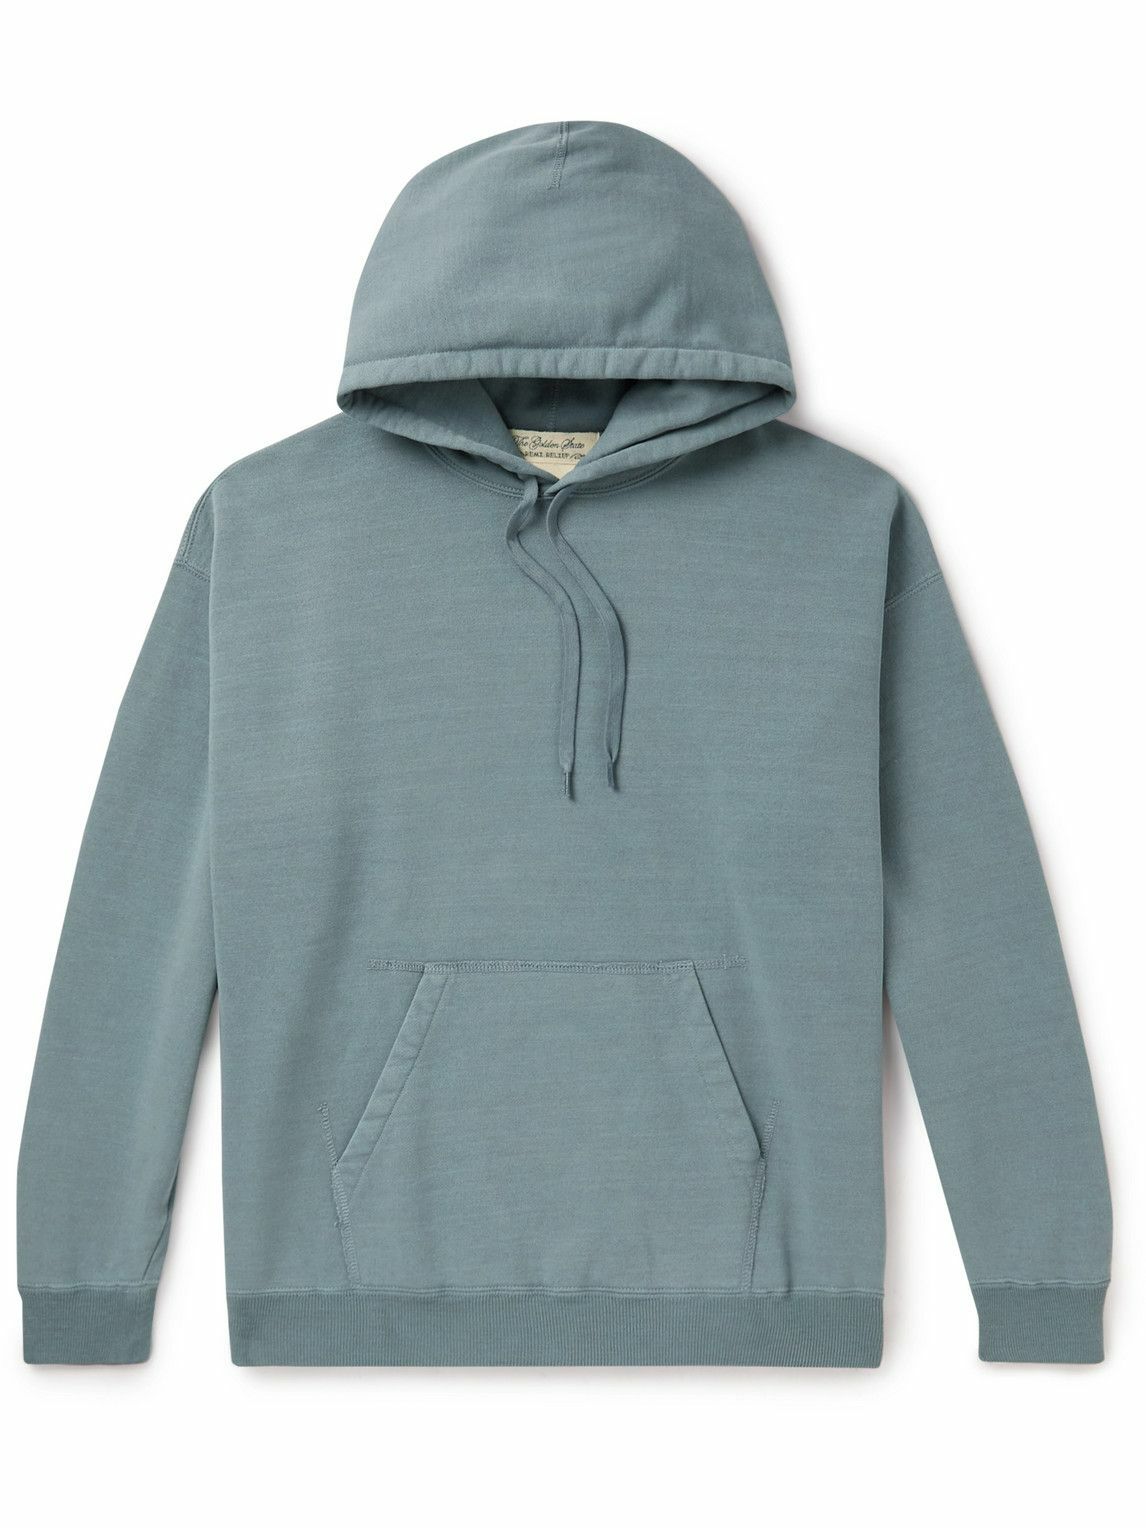 Remi Relief - D. Sax Cotton-Blend Jersey Hoodie - Blue Remi Relief